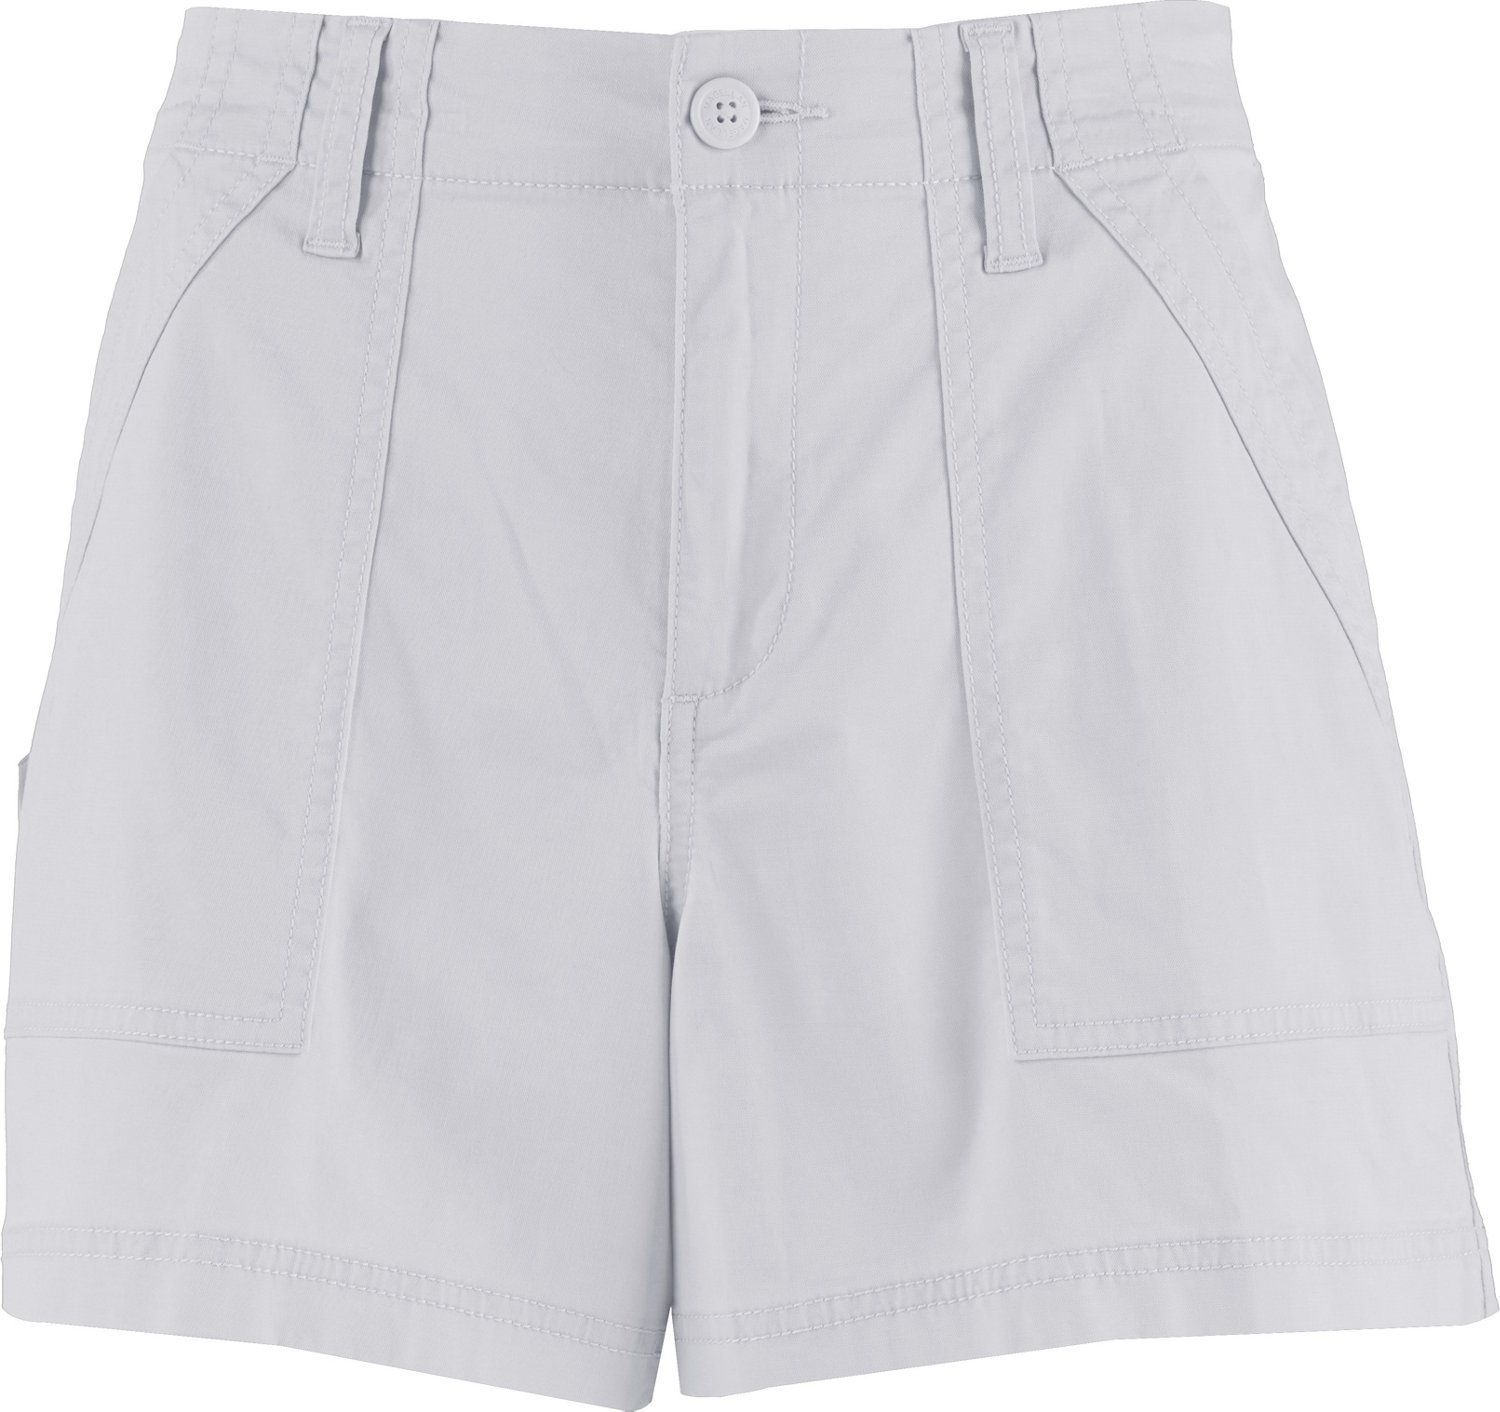 Magellan Outdoors Women's Hickory Canyon Hybrid Shorty Shorts                                                                    - view number 1 selected